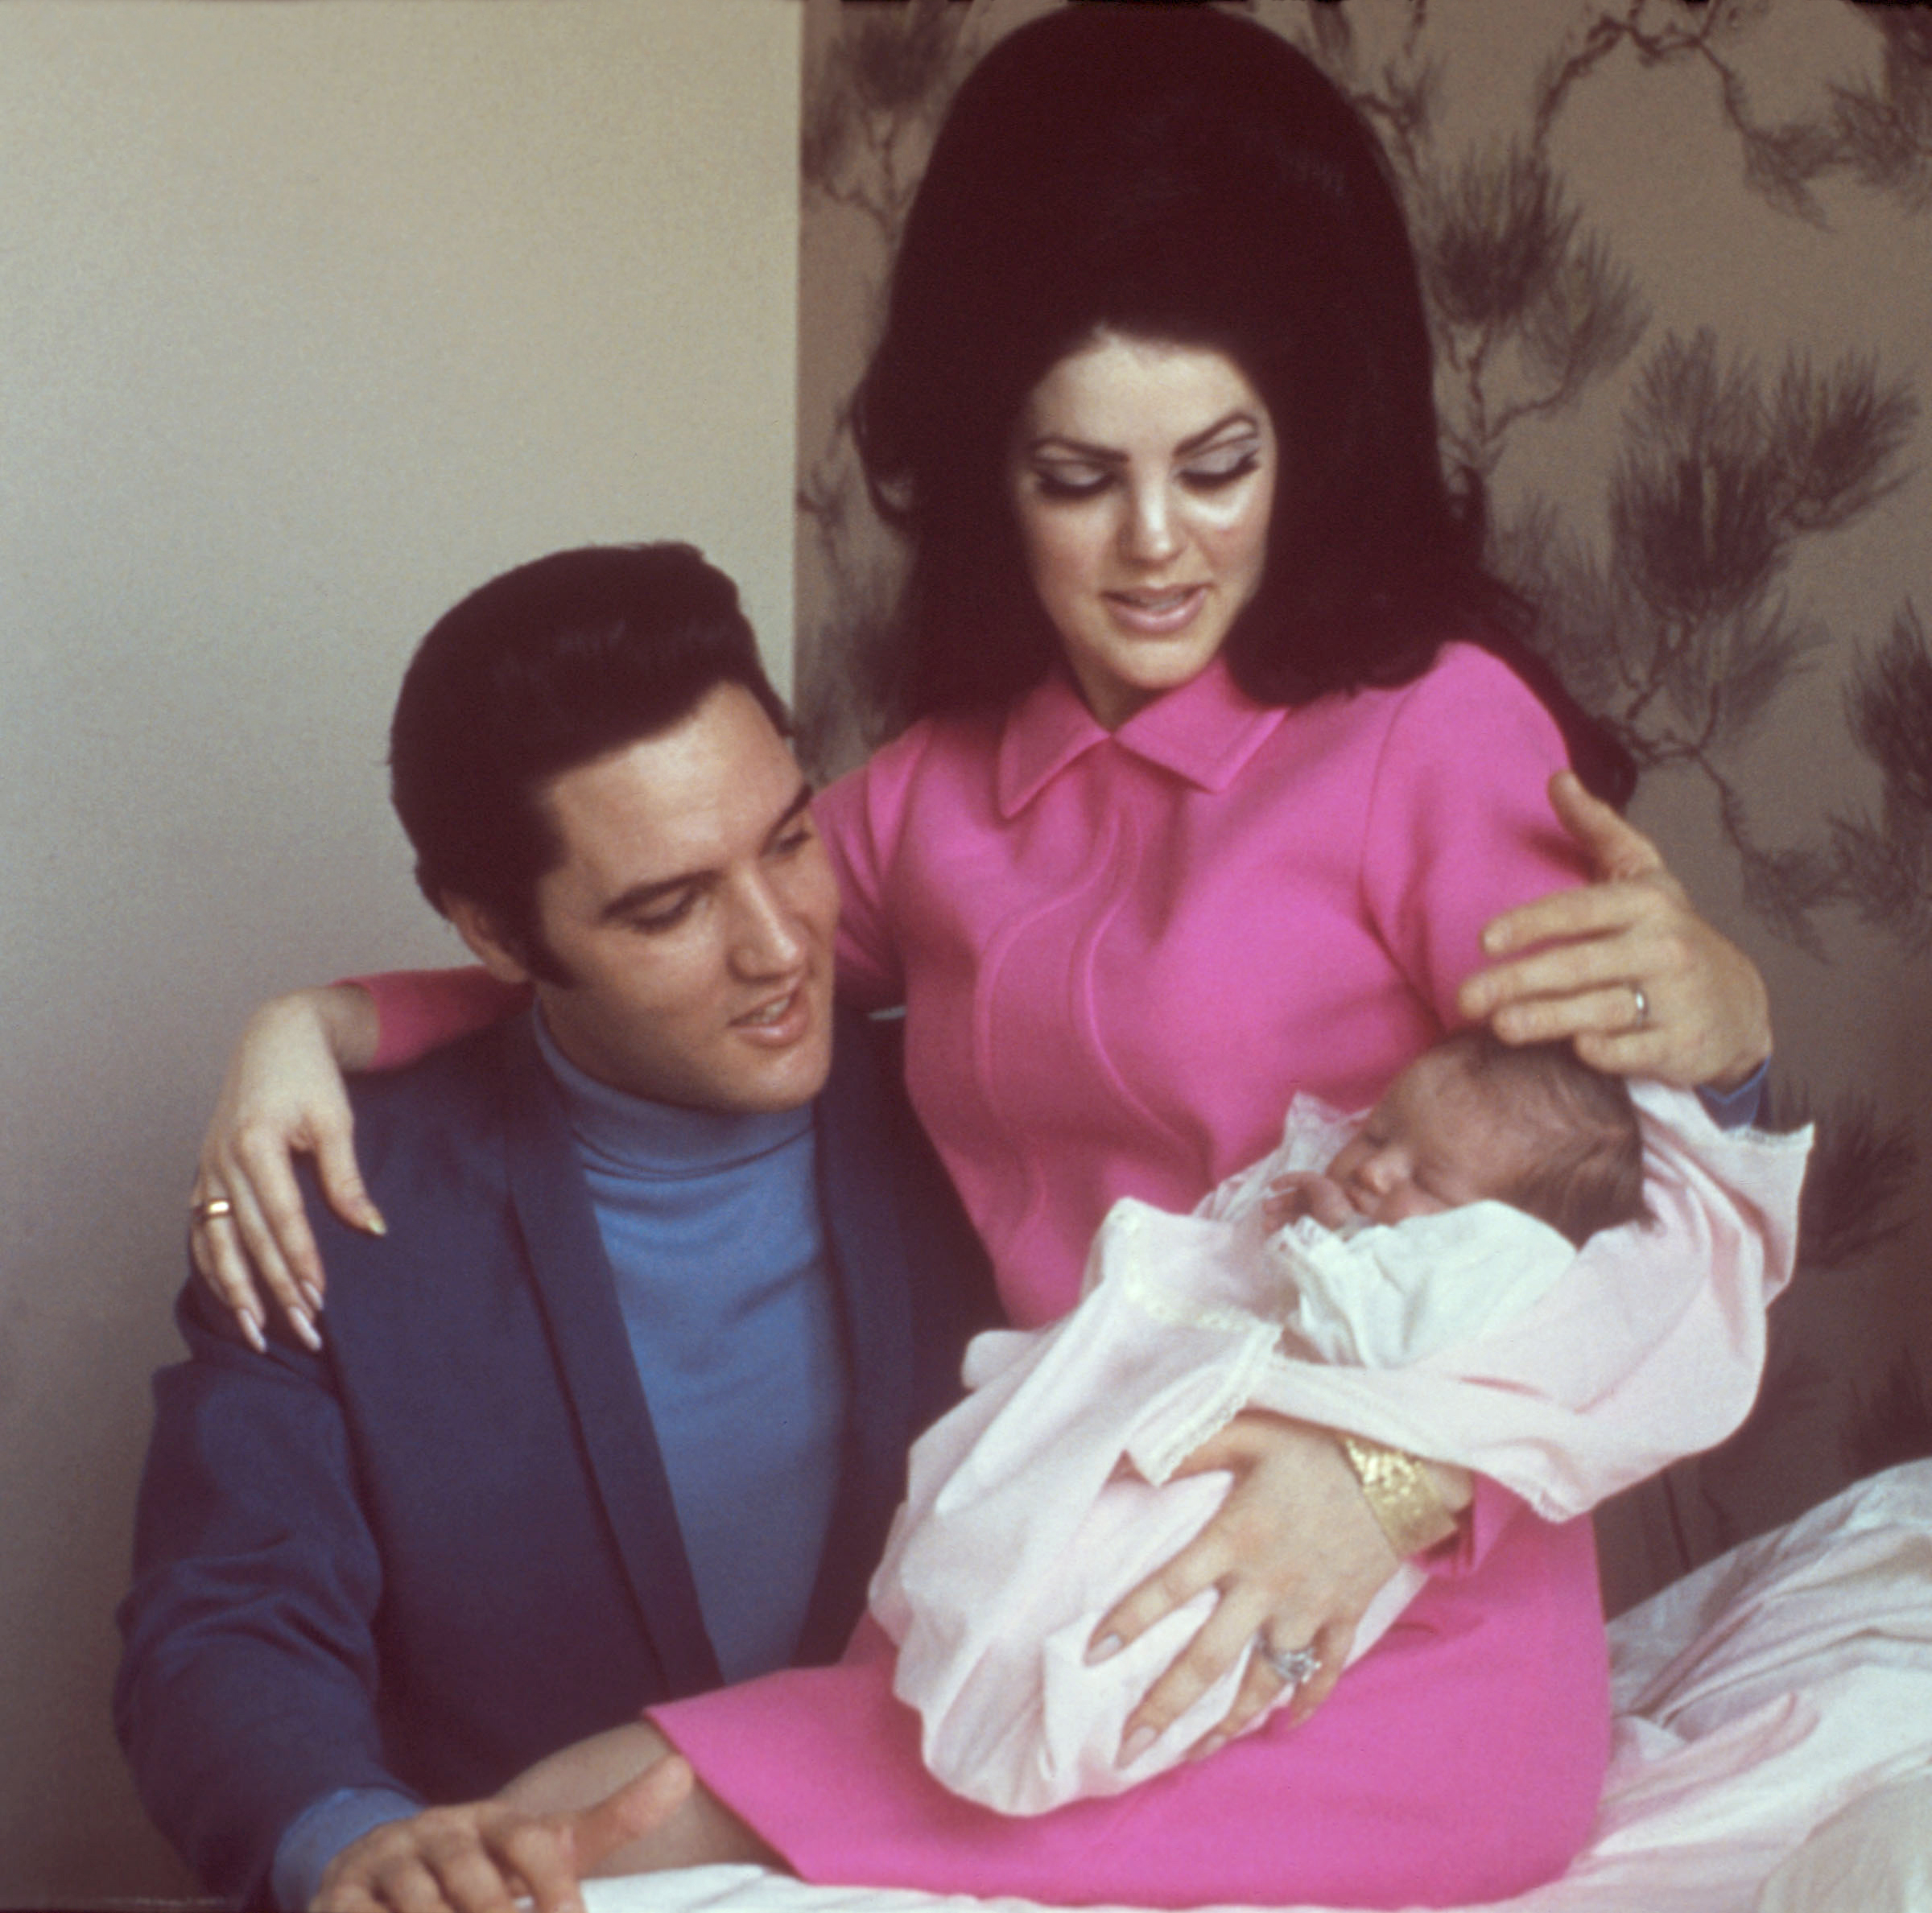 The couple holds their daughter, Lisa Marie, 1968